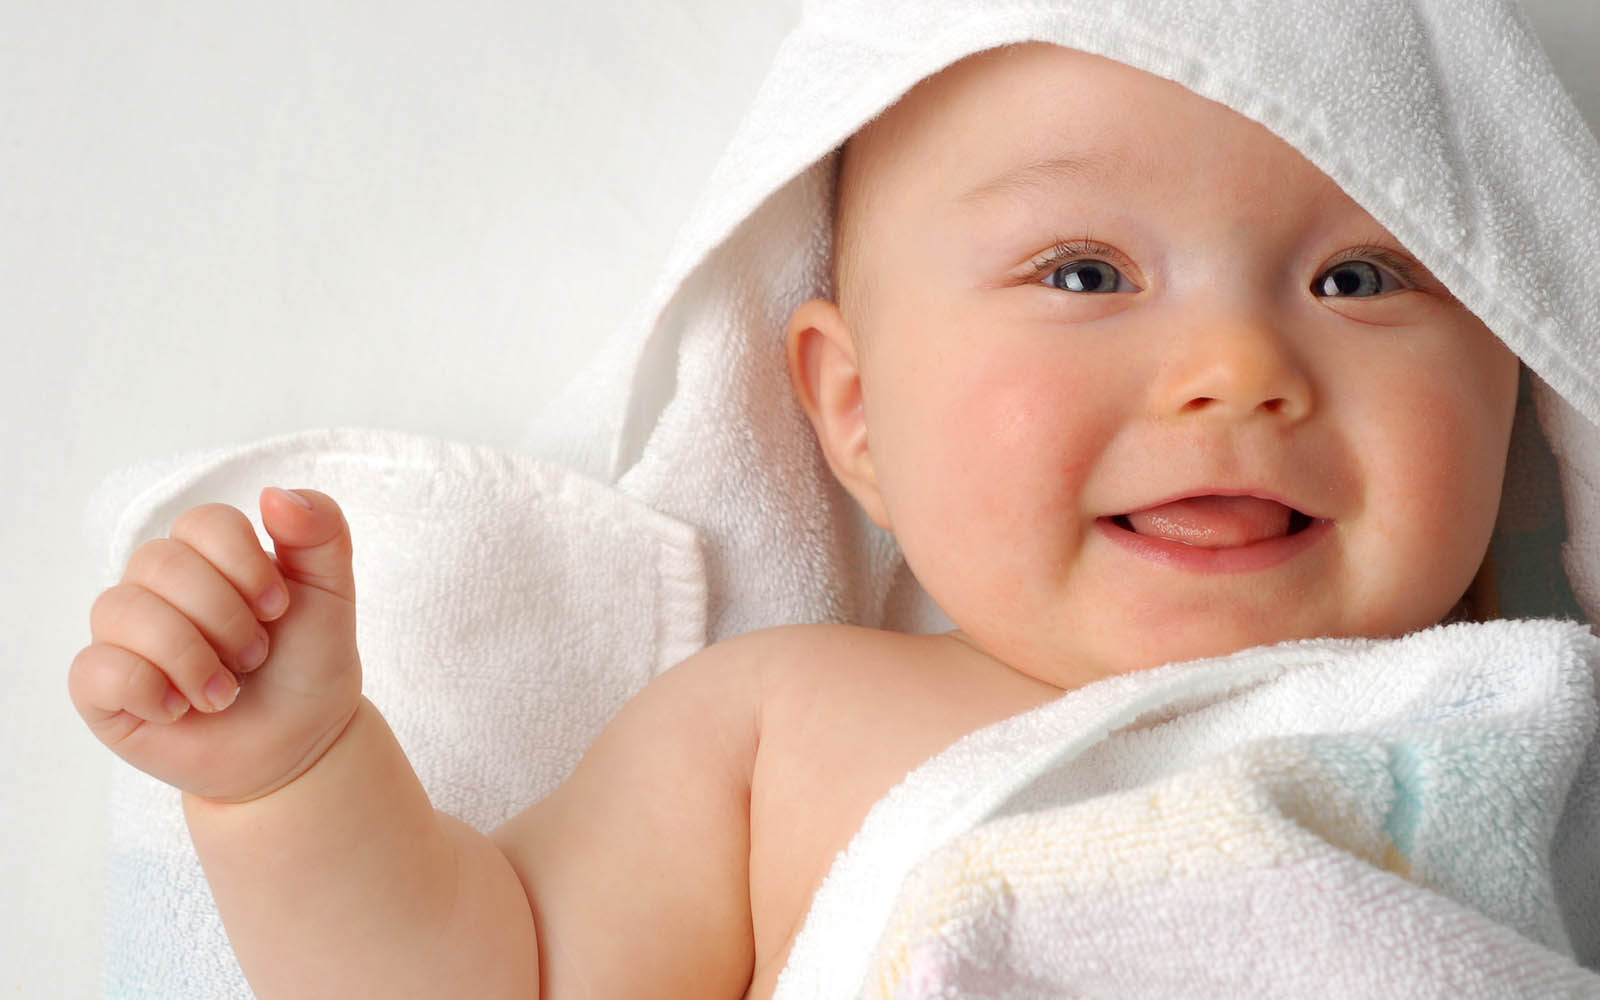 Funny Babies Wallpapers 20569 Hd Wallpapers in Baby   Imagescicom 1600x1000